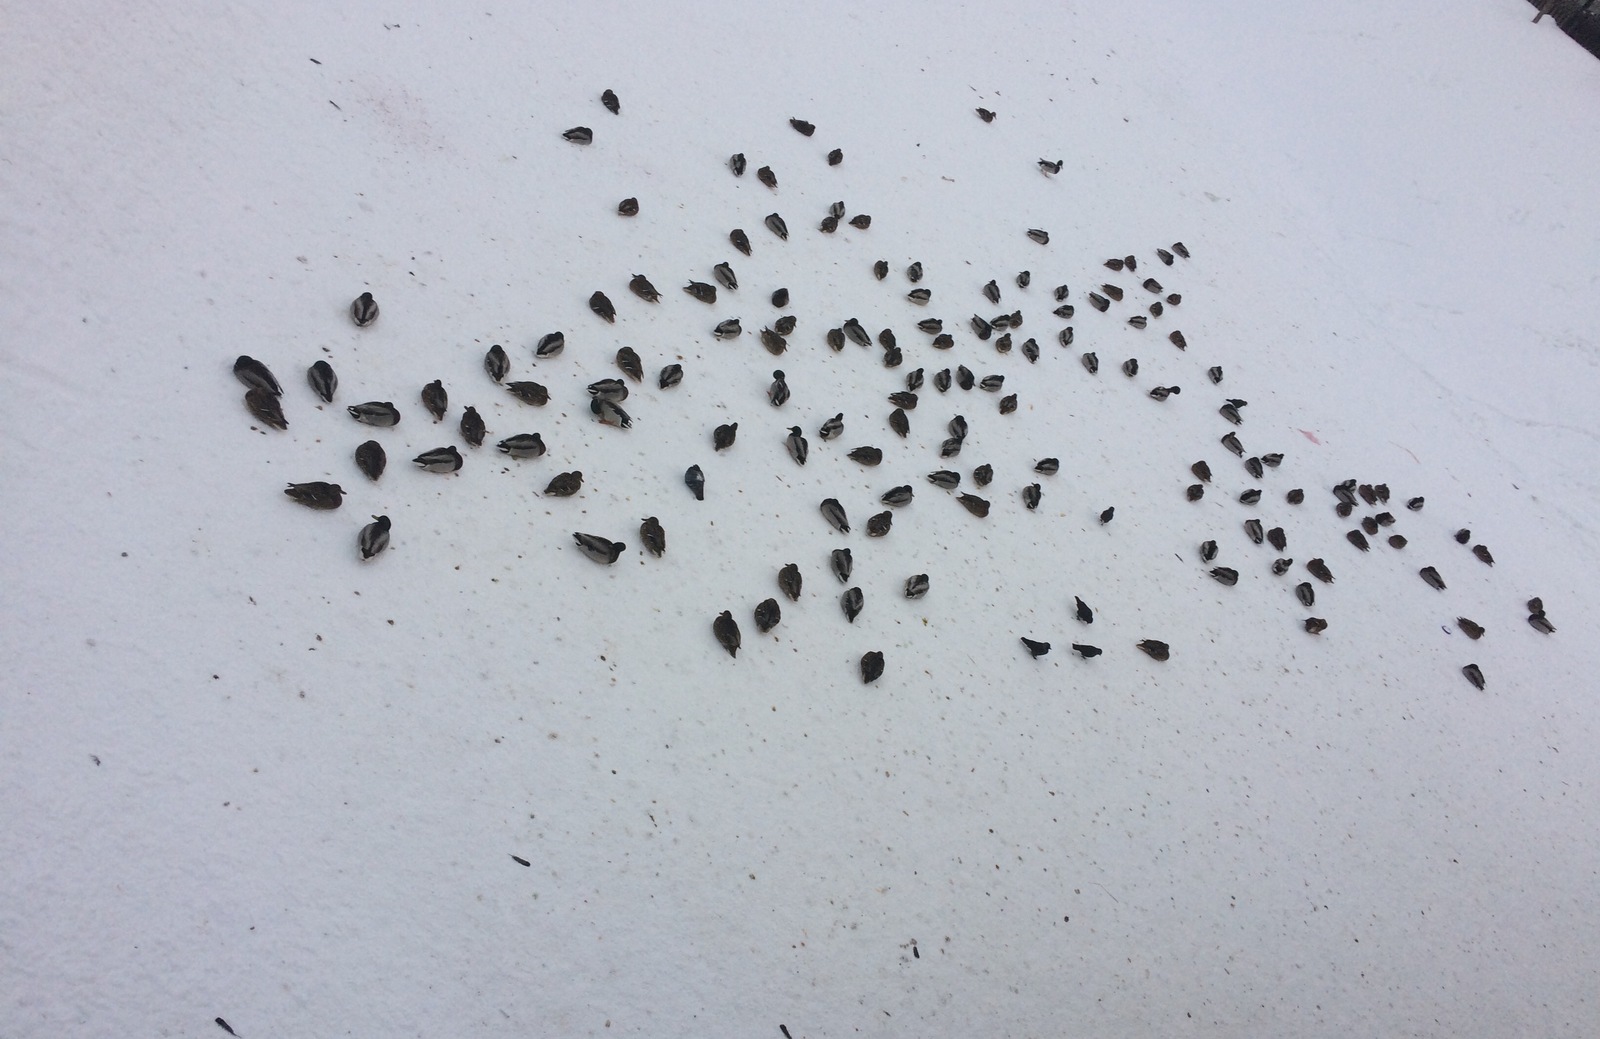 Seeds scattered...) - My, Seeds, Duck, Snow